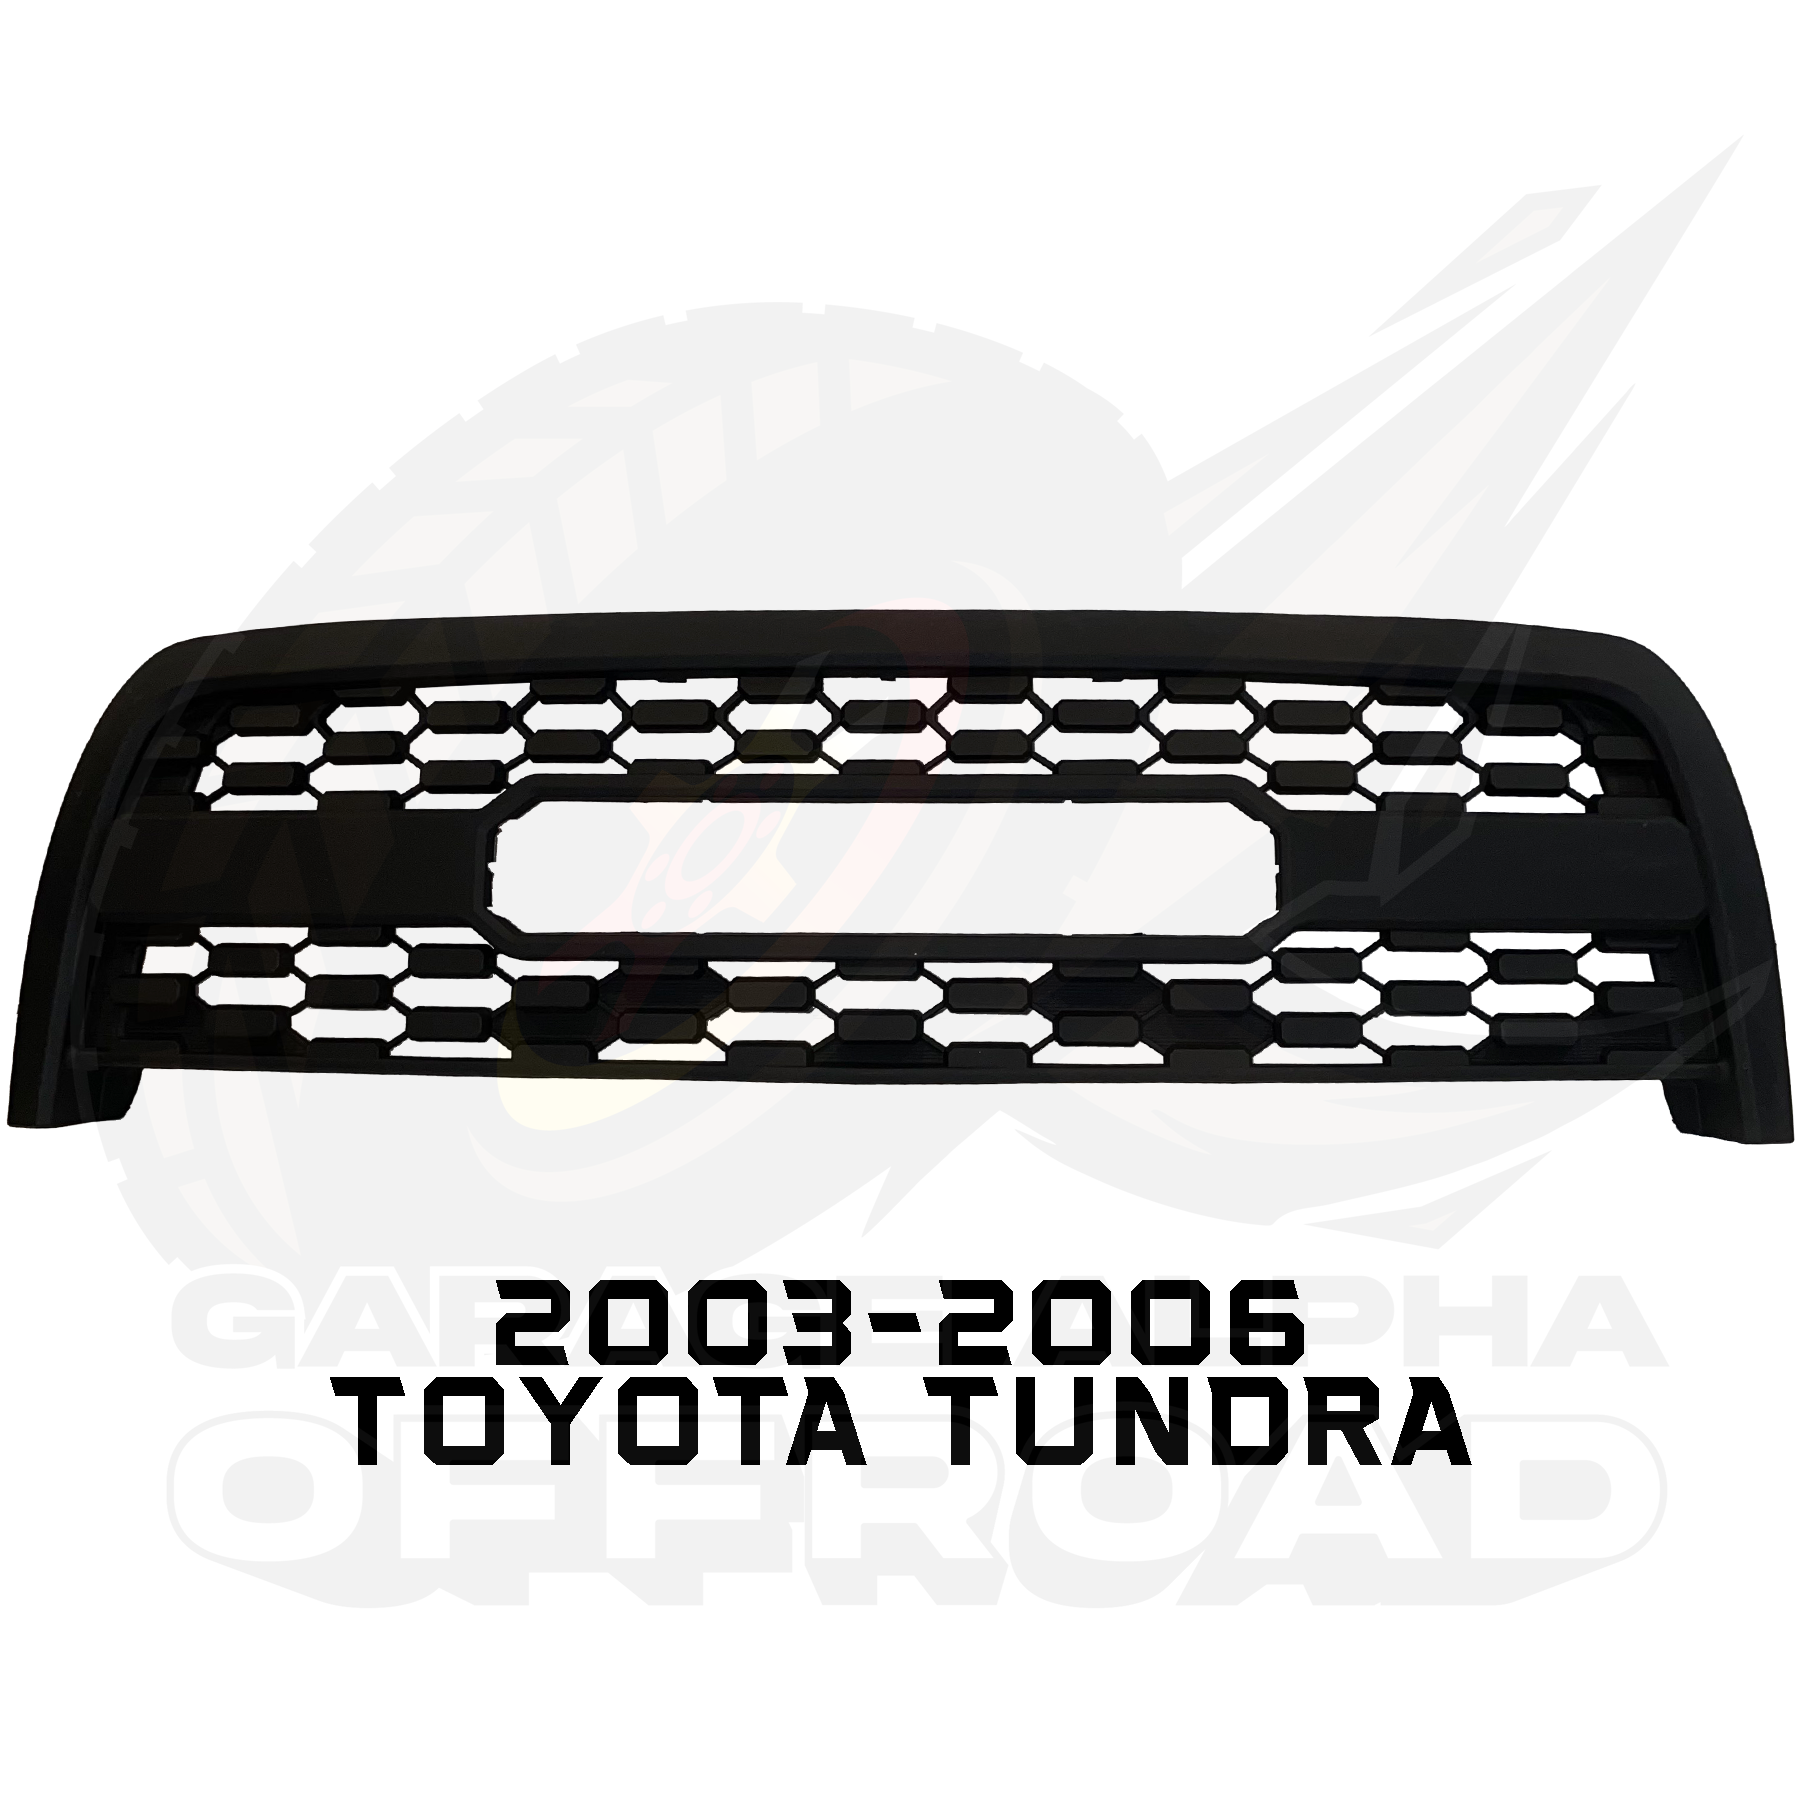 2003-2006 Toyota Tundra TRD Style Grille